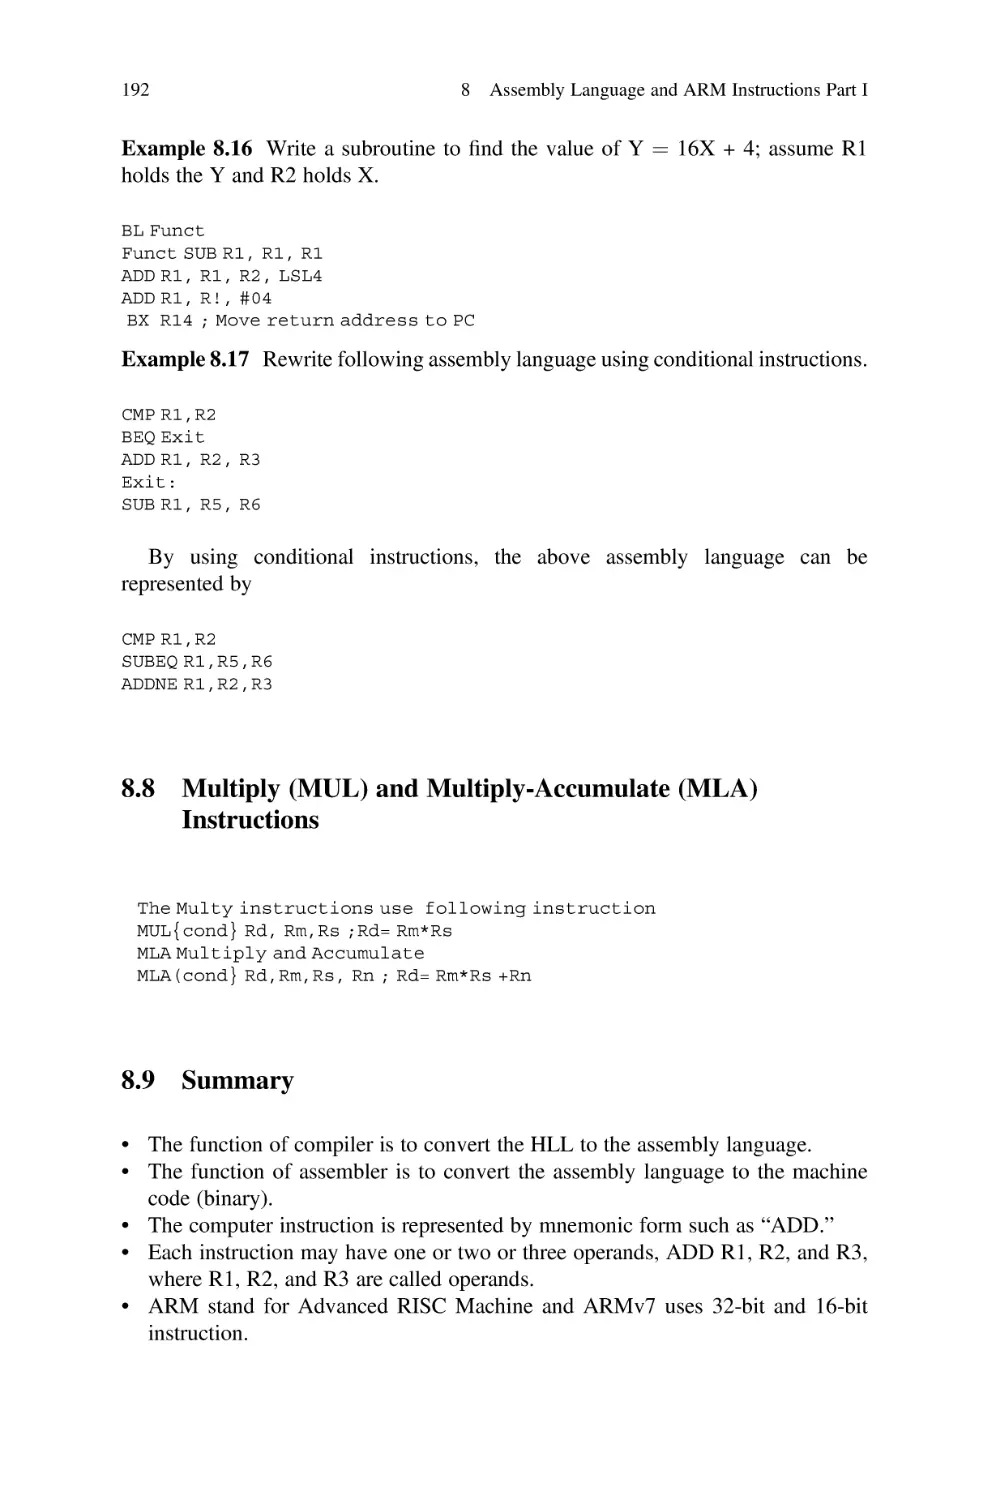 8.8 Multiply (MUL) and Multiply-Accumulate (MLA) Instructions
8.9 Summary